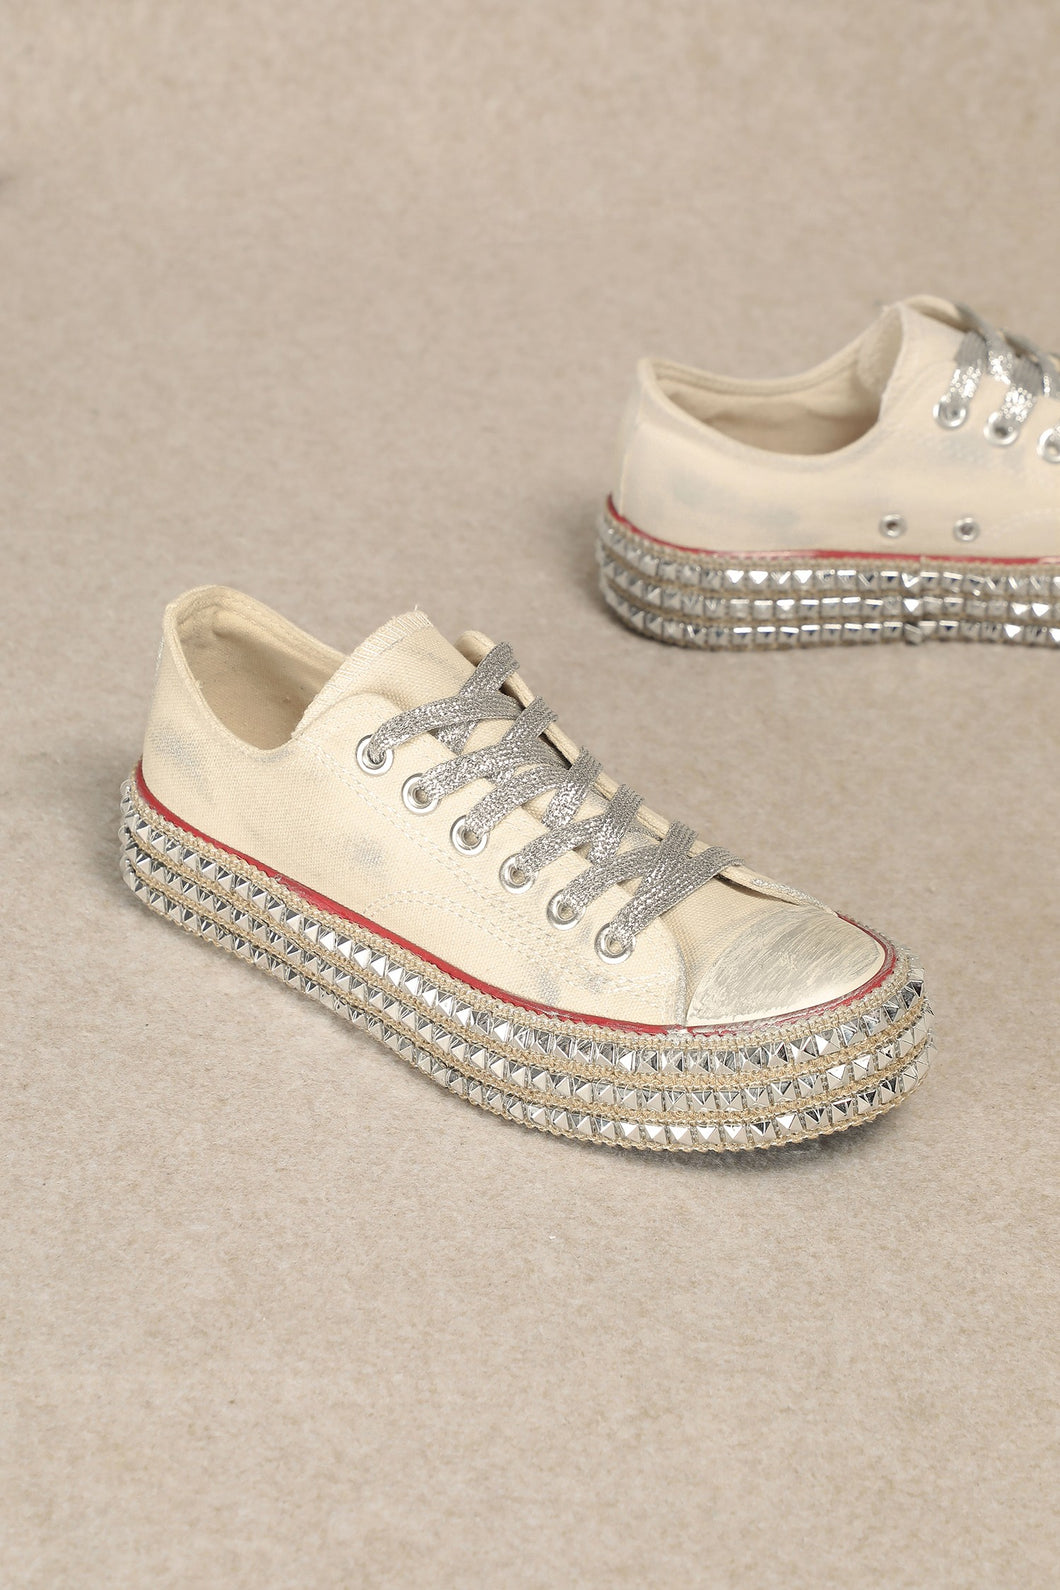 Lace up studded platform Low Top Sneaker